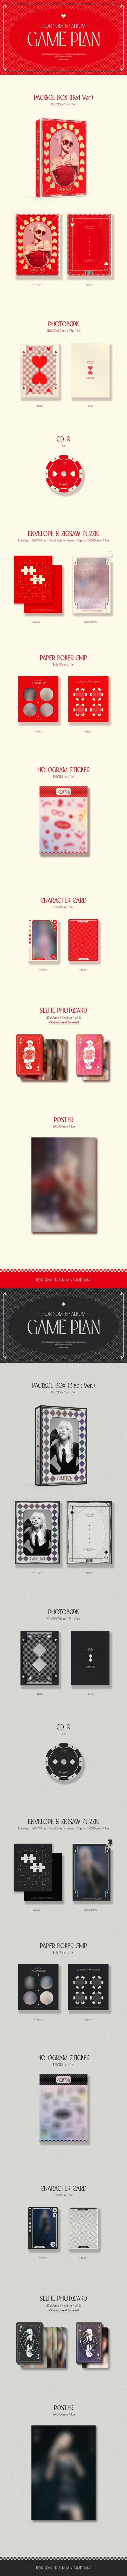 Jeon So-mi, an irreplaceable female solo artist, came to the public with her EP ALBUM [GAME PLAN]. This album, which conta...